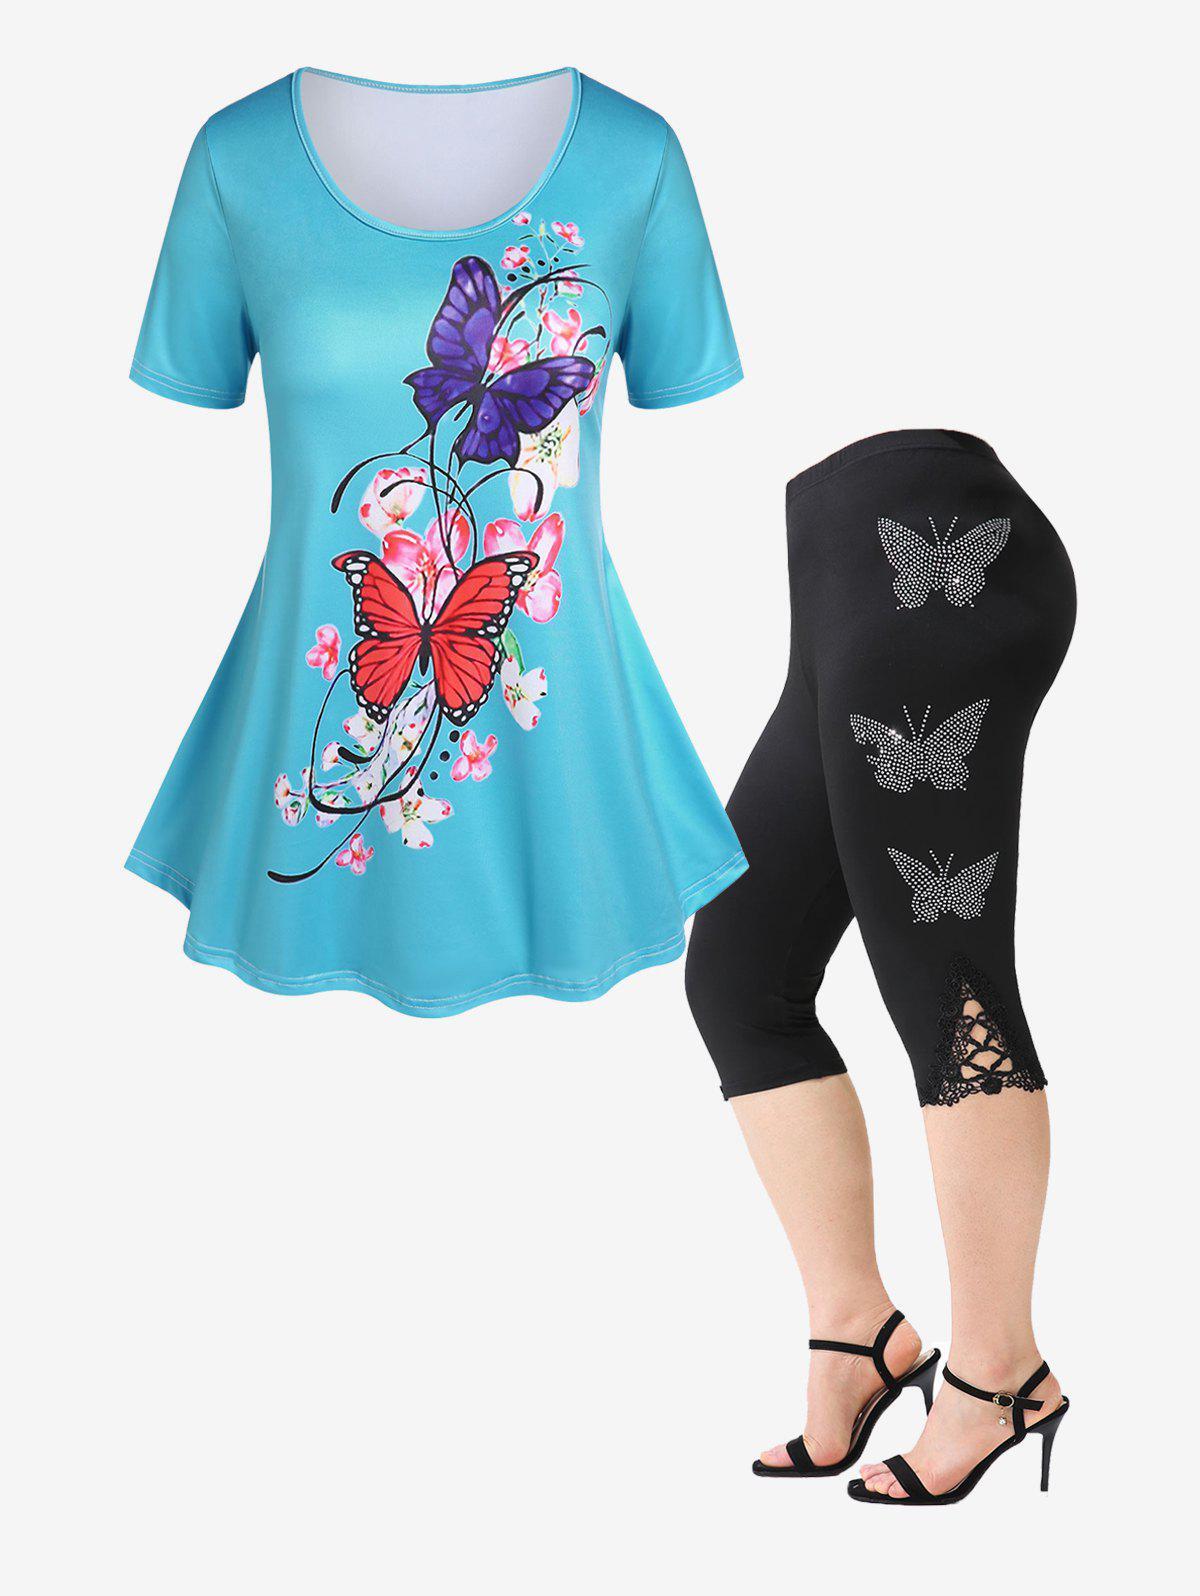 3D Sparkles Stars Printed Tee and Leggings Matching Set Plus Size Summer Outfit